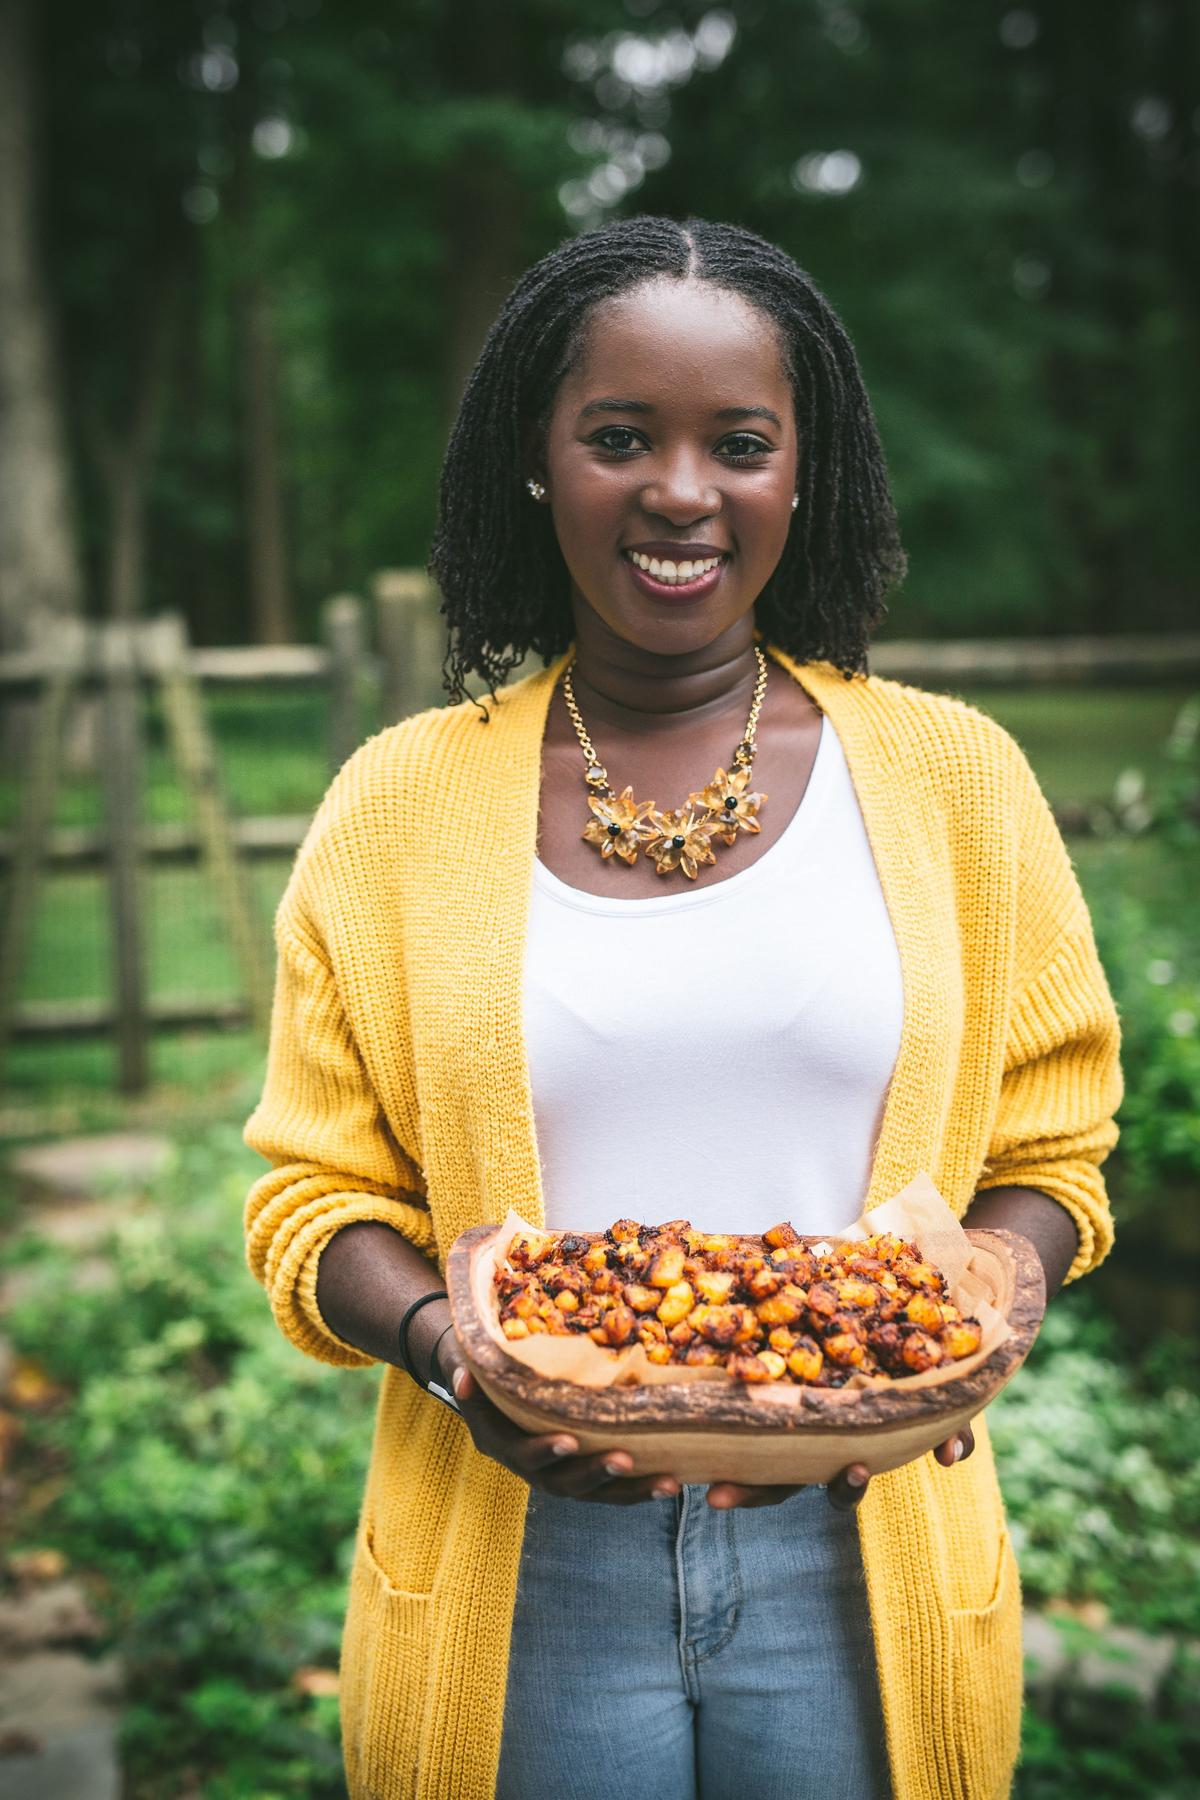 Hadeed's first guest, a good friend who is Ghanian-American, spoke about her recipe for kelewewe, a fried plantain dish specific to Ghana. (Becky Hadeed)